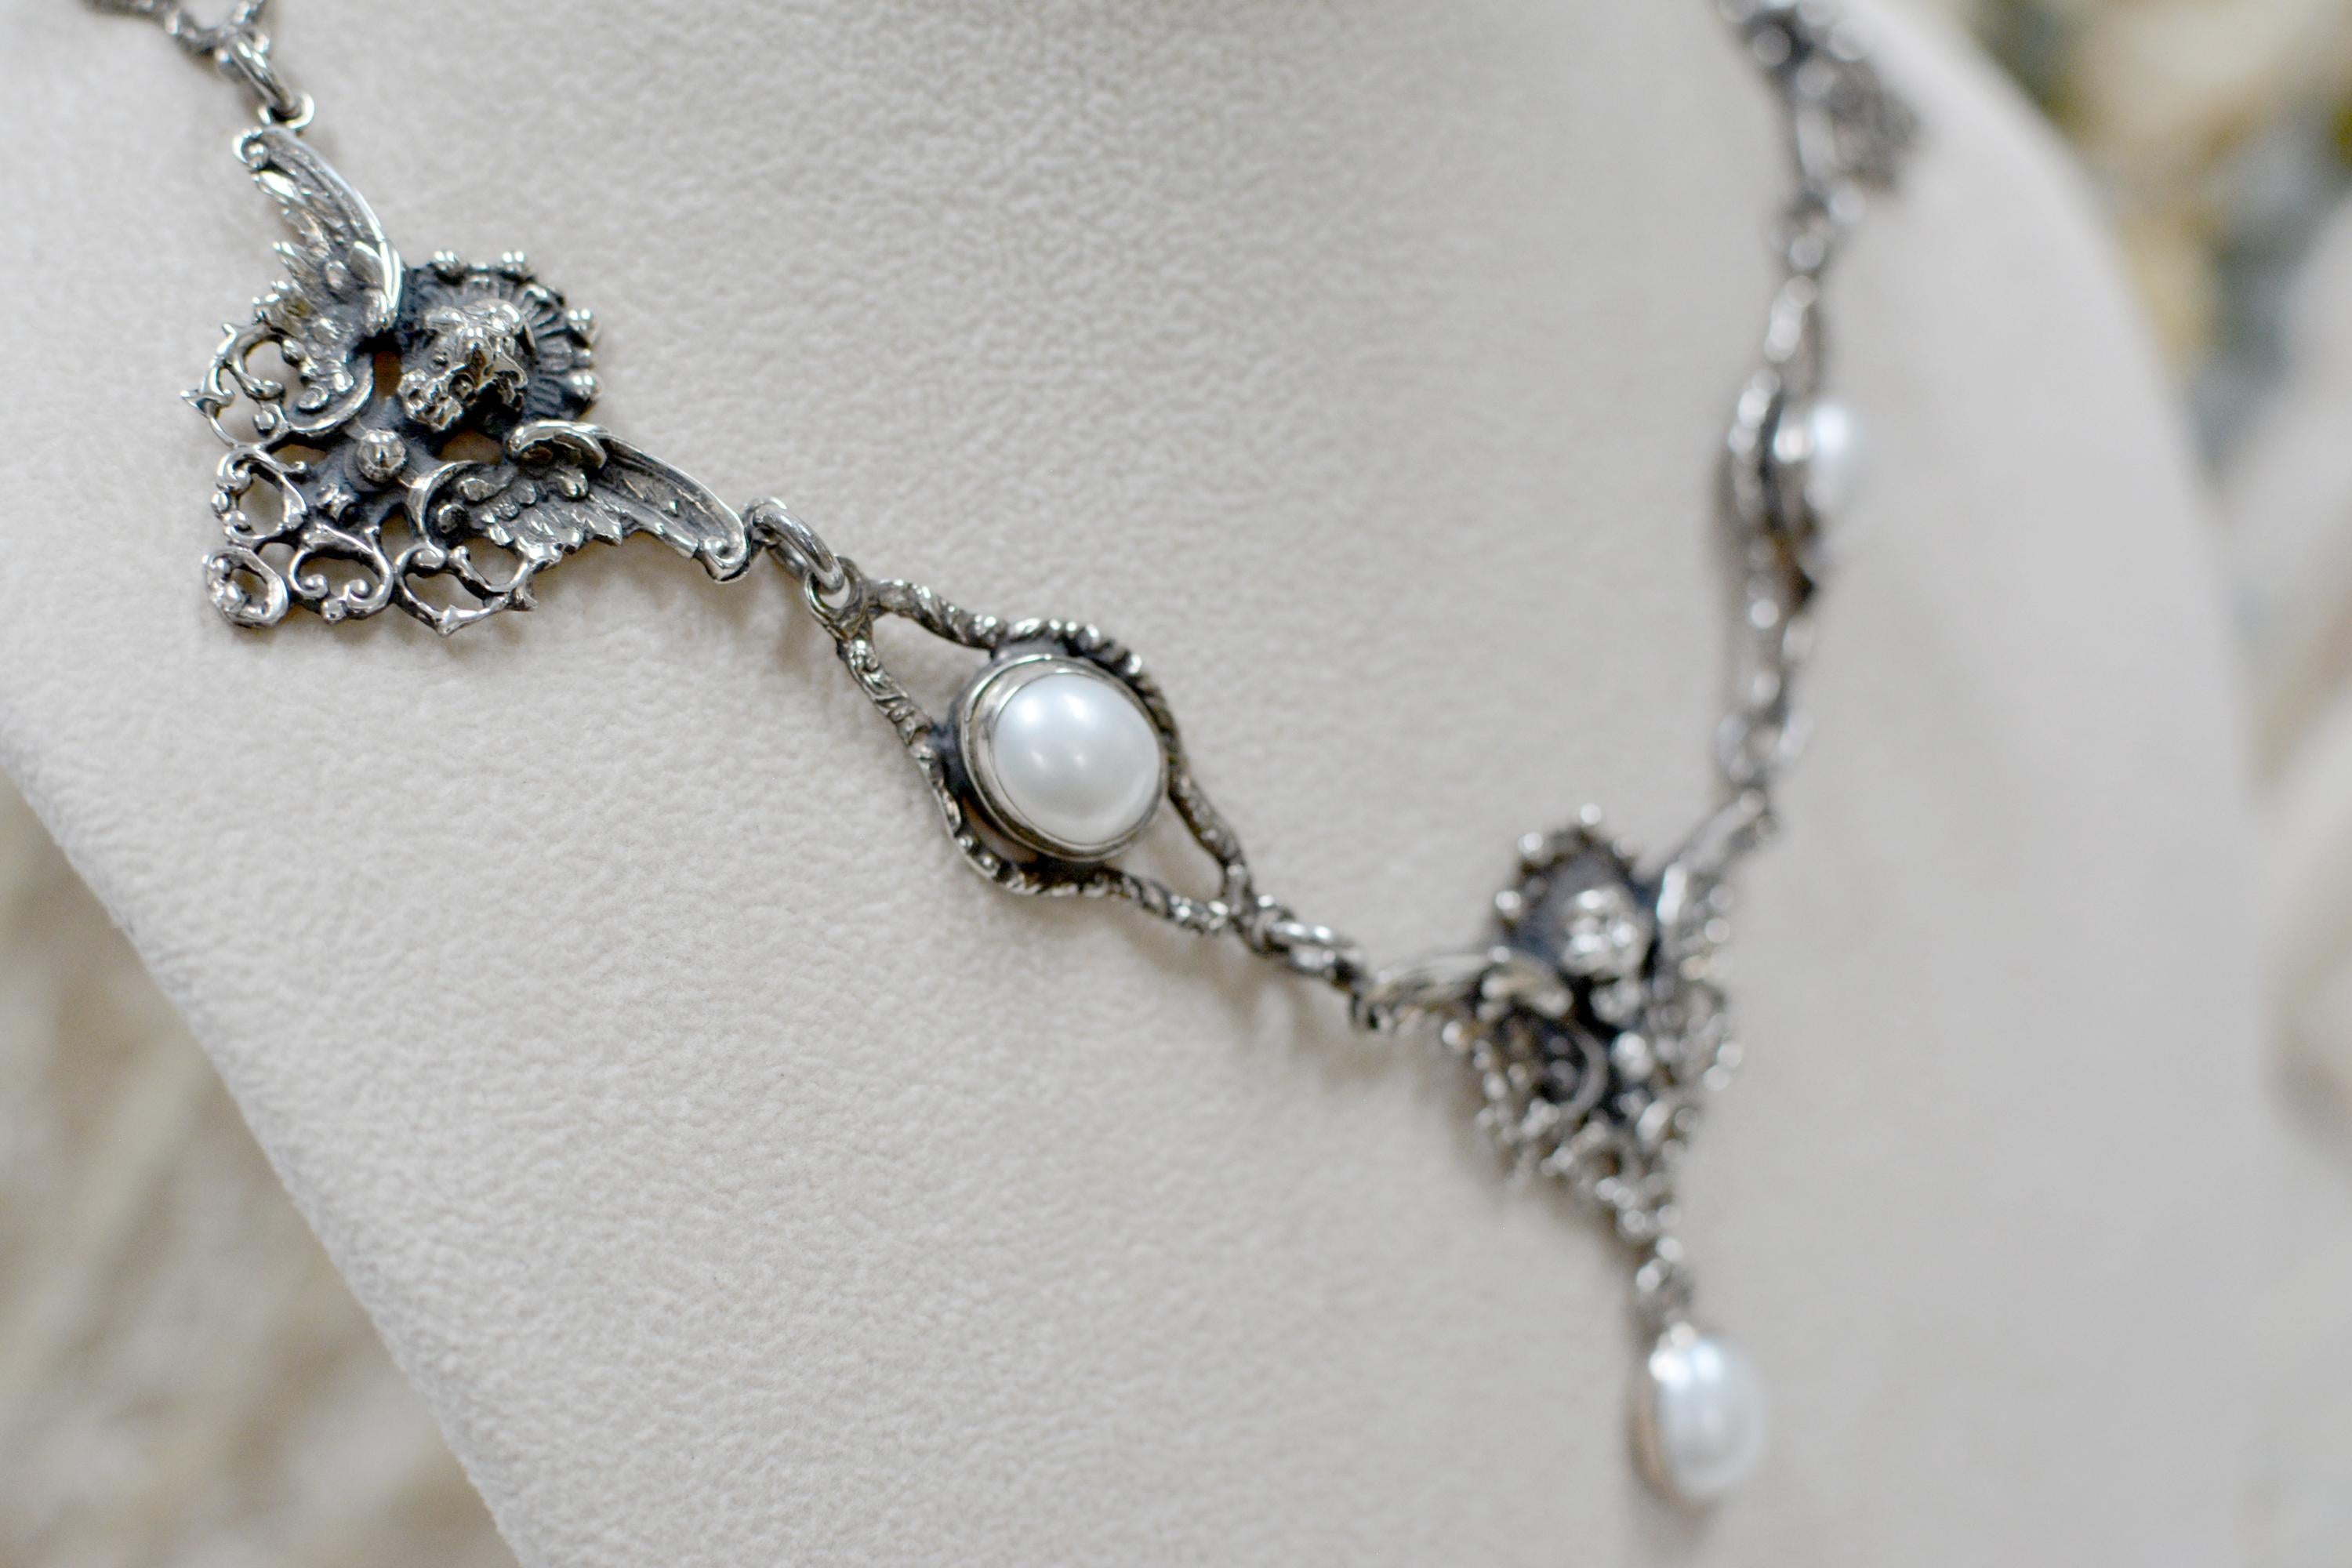 Women's or Men's Jill Garber Collection Drop Necklace with Freshwater Pearls and Figural Angels